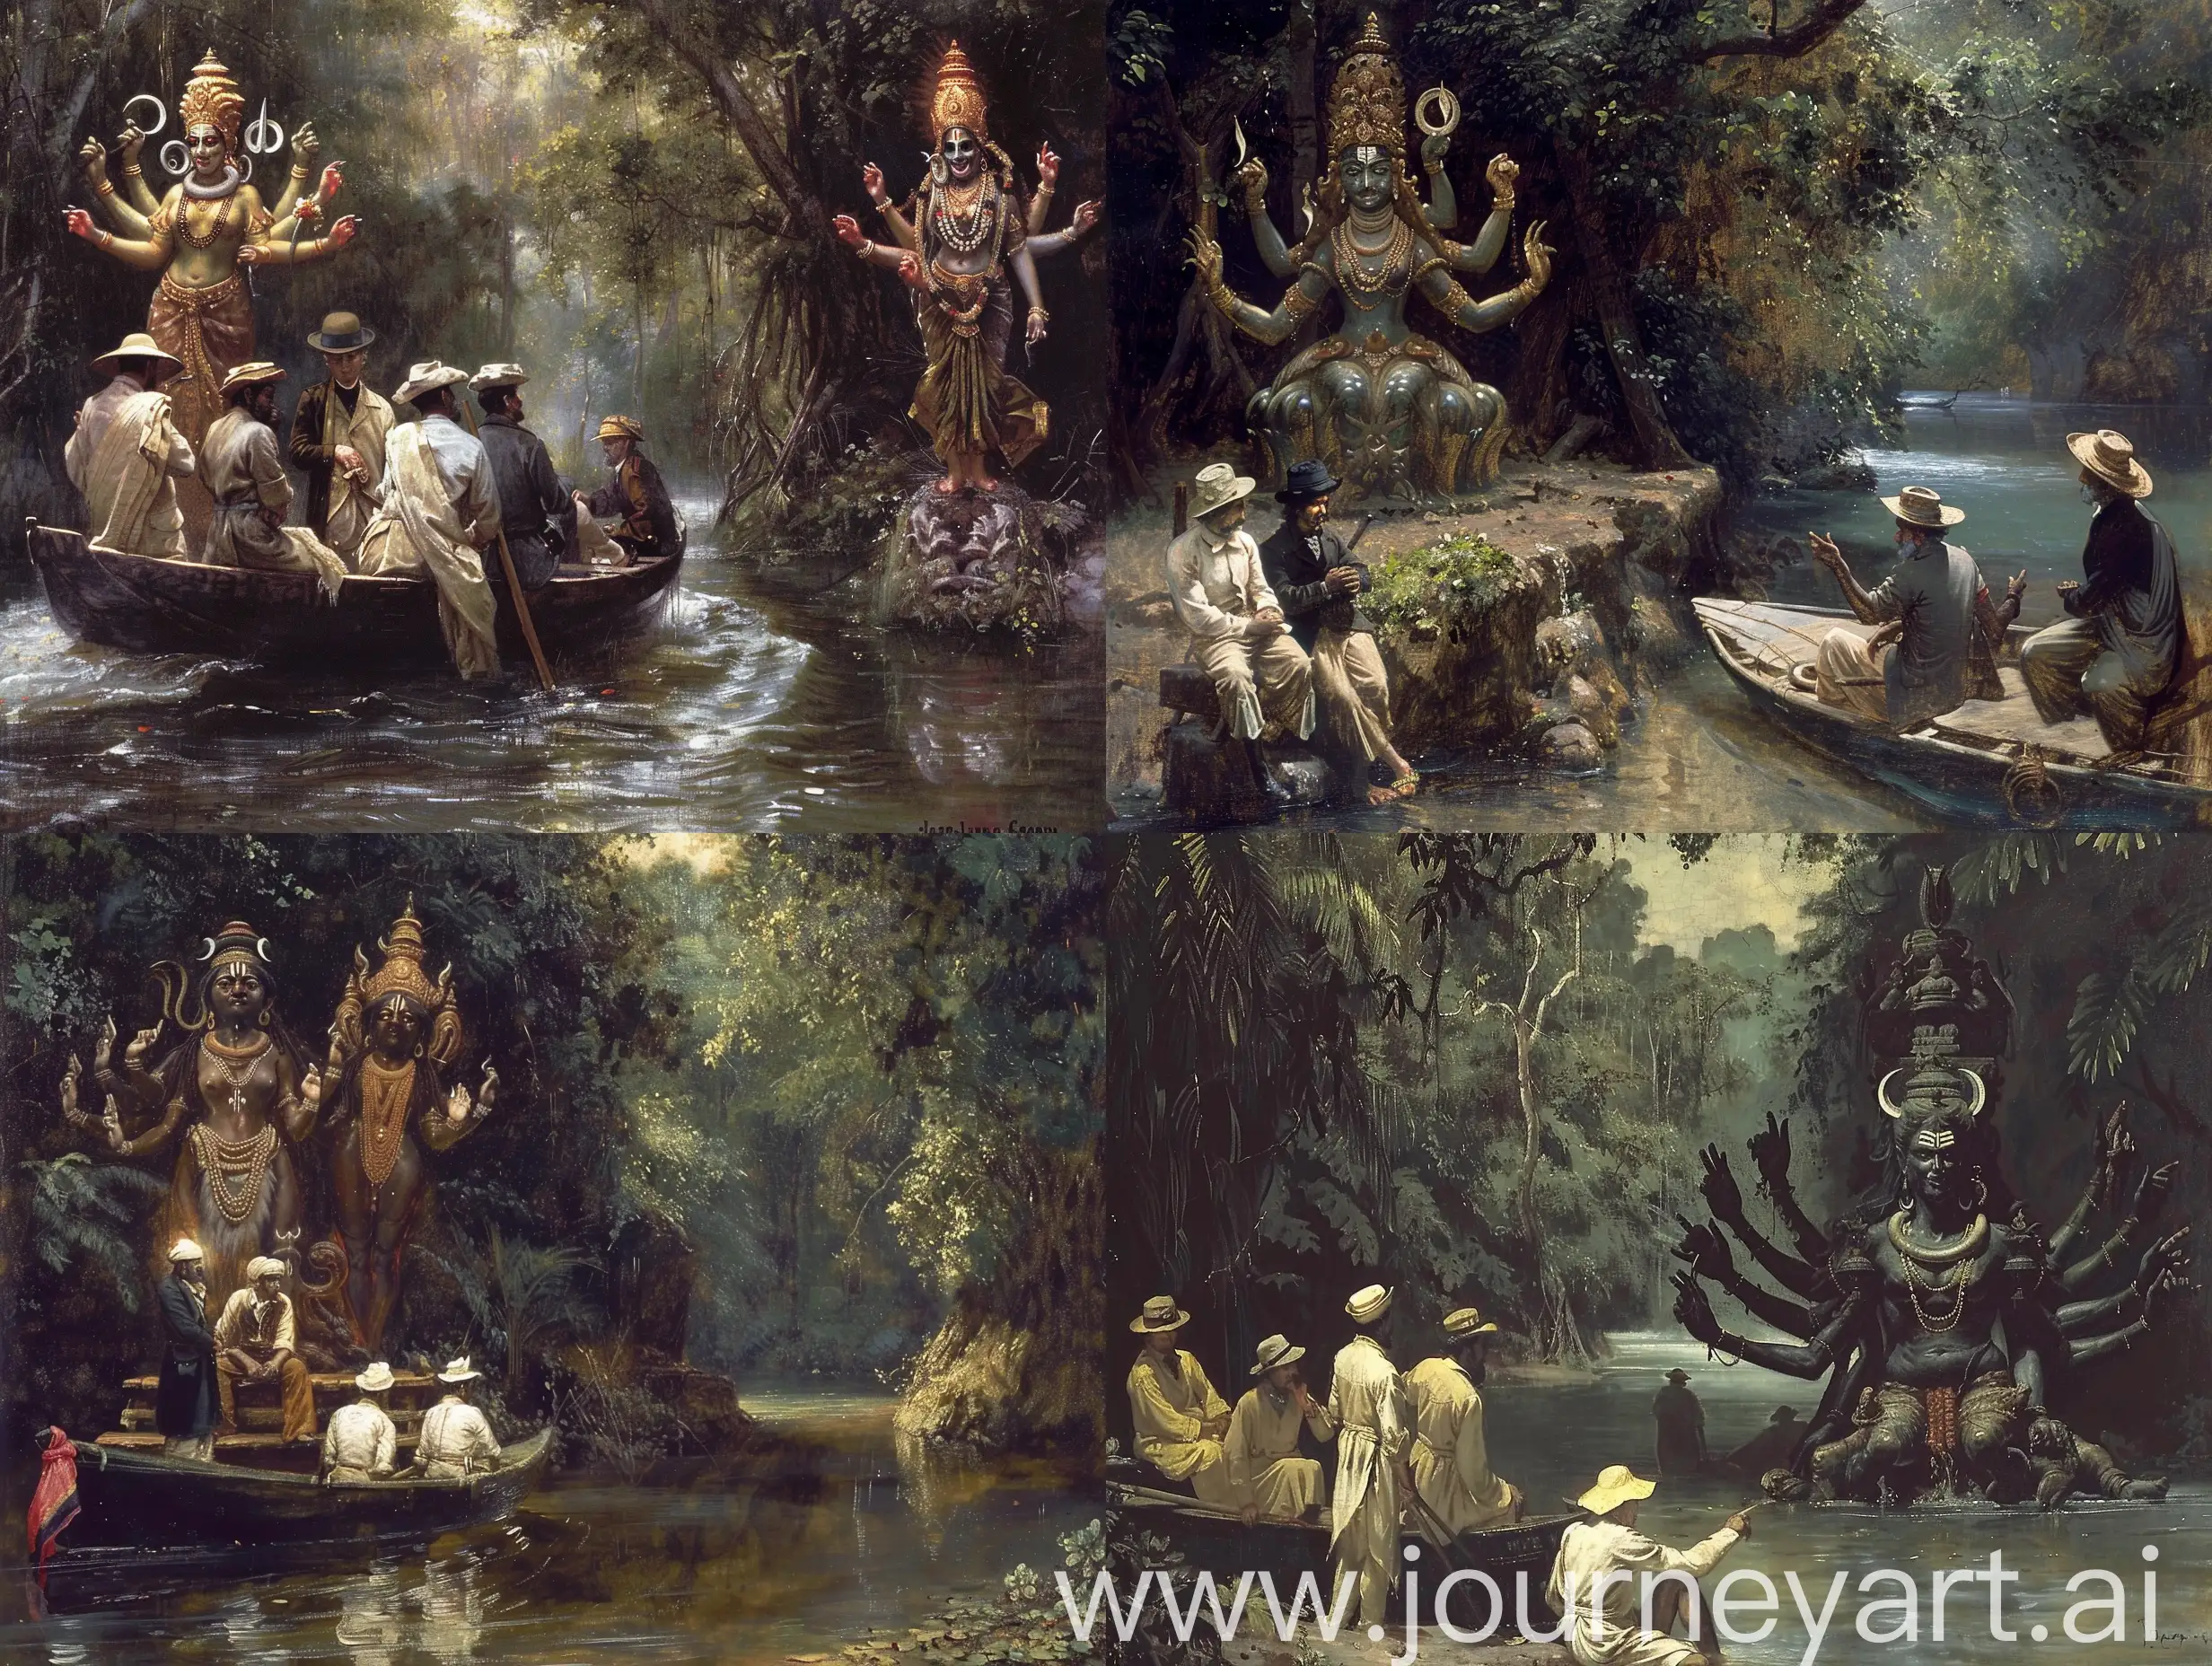 A painting by jean-leon gerome of a party of british adventurers travelling in a river boat through the jungle wearing 1890s clothes and pith helmets and finding a mystical hindu shrine with a demonic statue of the goddess shiva with 4 arms beside the river. 